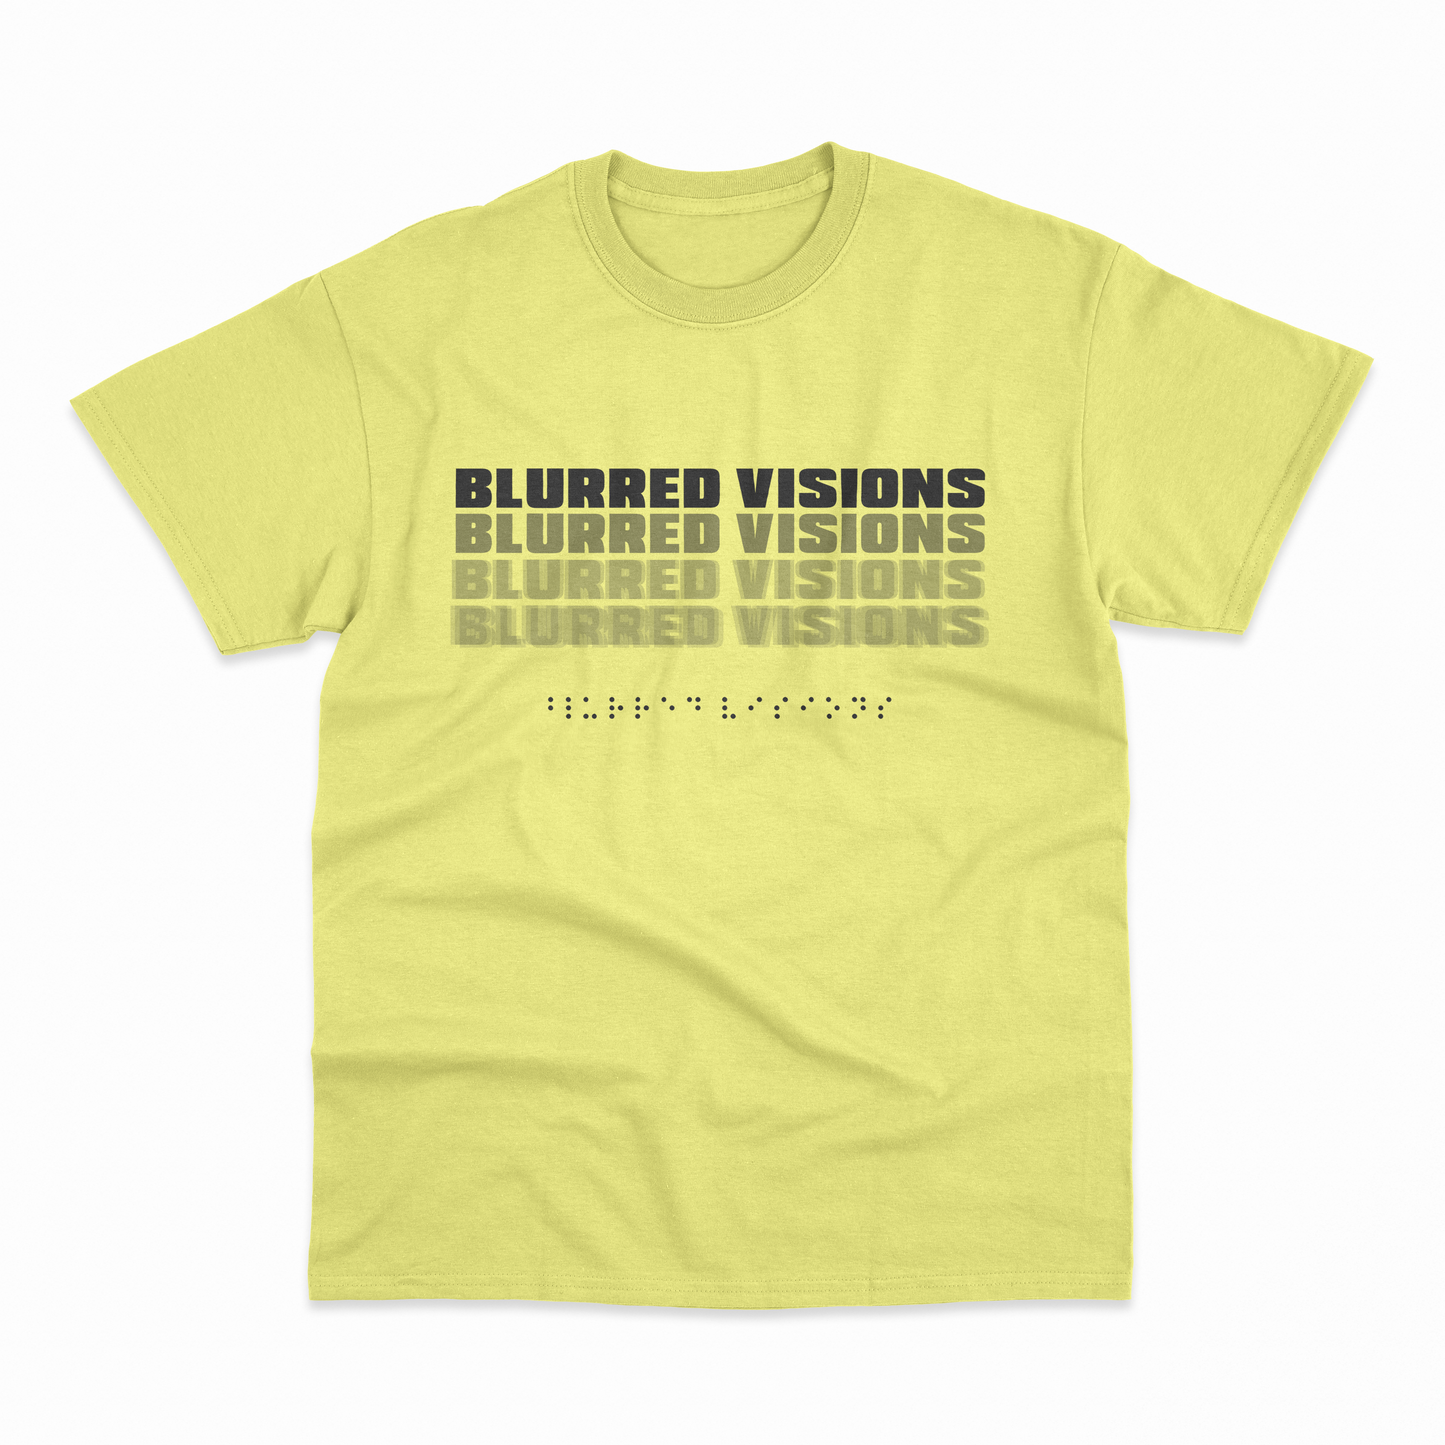 Blurred Visions - Limited Edition - Summer Colors Adult Tee